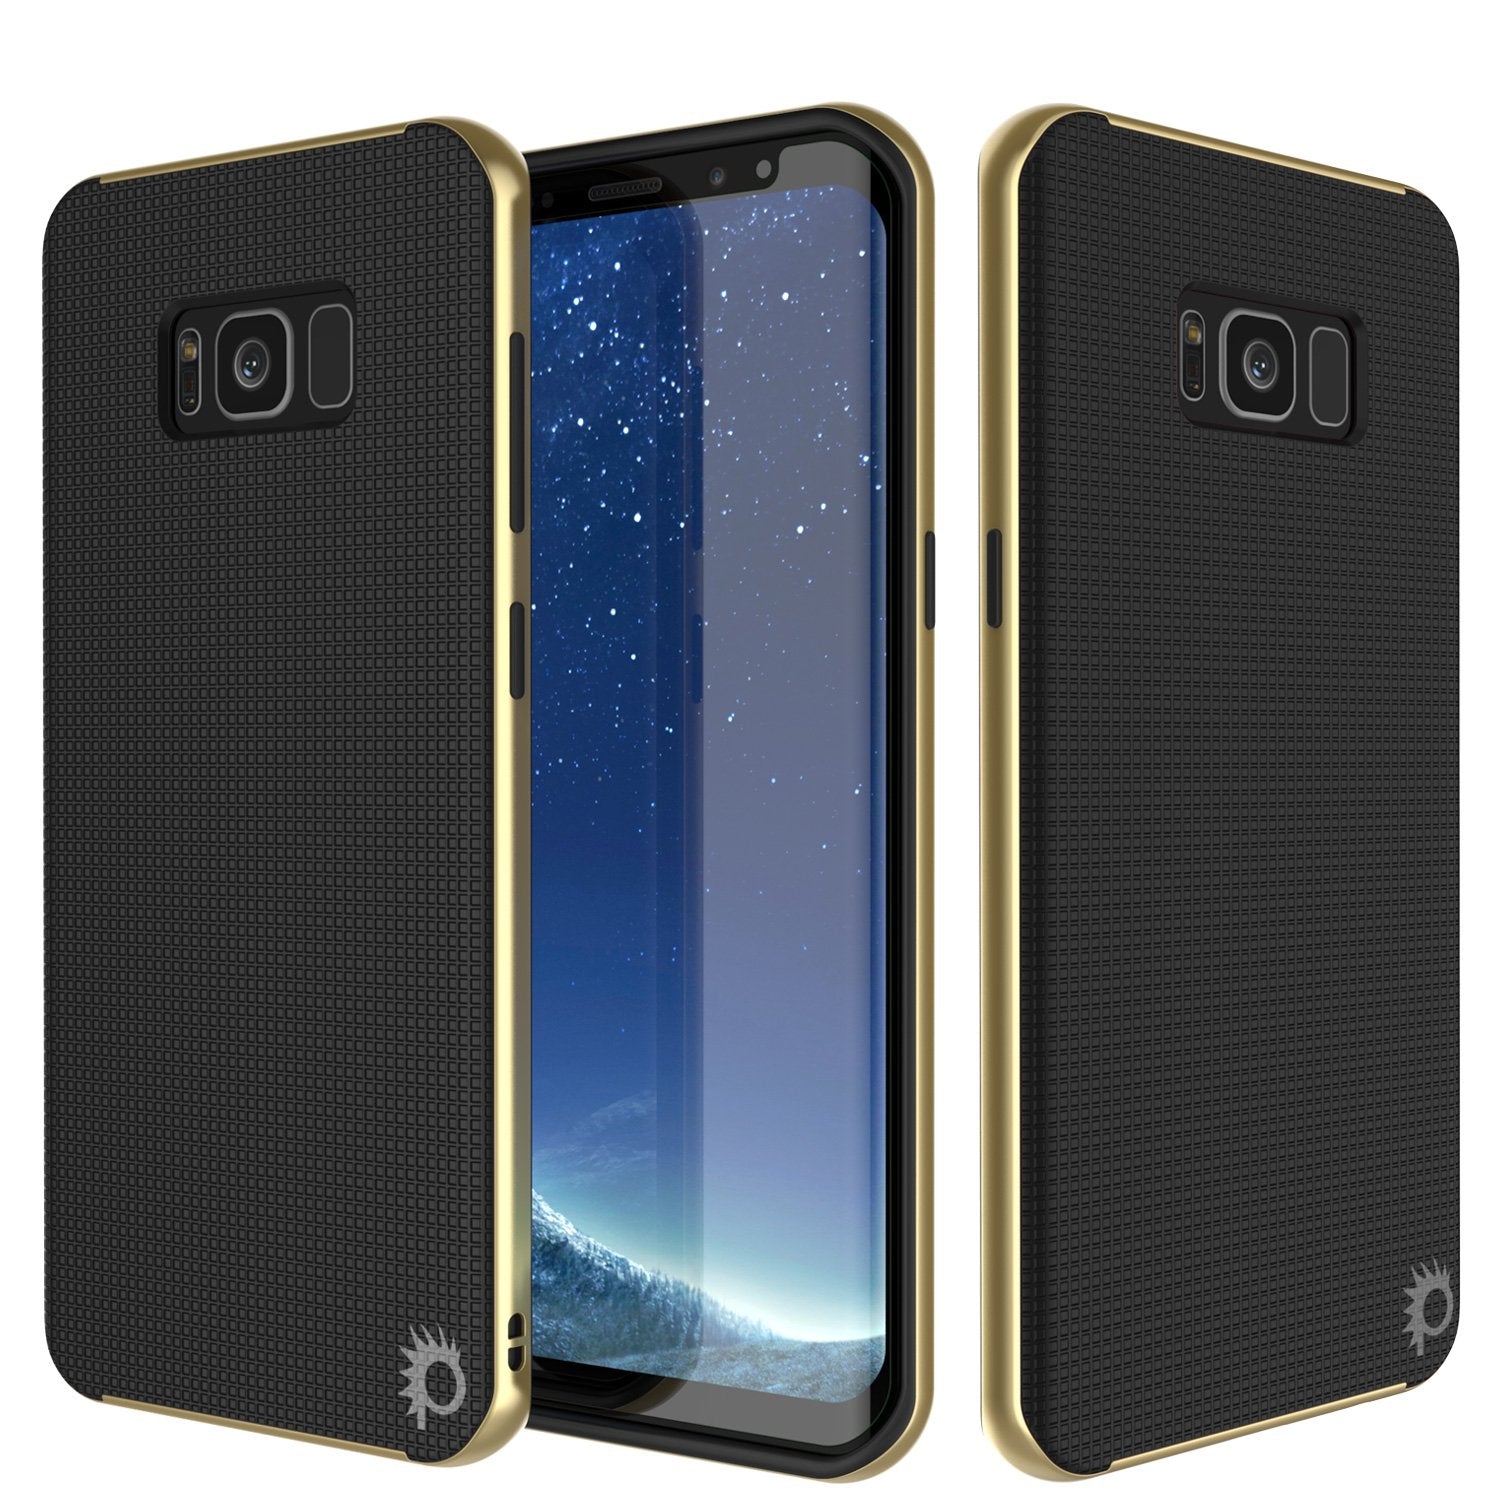 Galaxy S8 Case, PunkCase [Stealth Series] Hybrid 3-Piece Shockproof Dual Layer Cover [Non-Slip] [Soft TPU + PC Bumper] with PUNKSHIELD Screen Protector for Samsung S8 Edge [Gold]